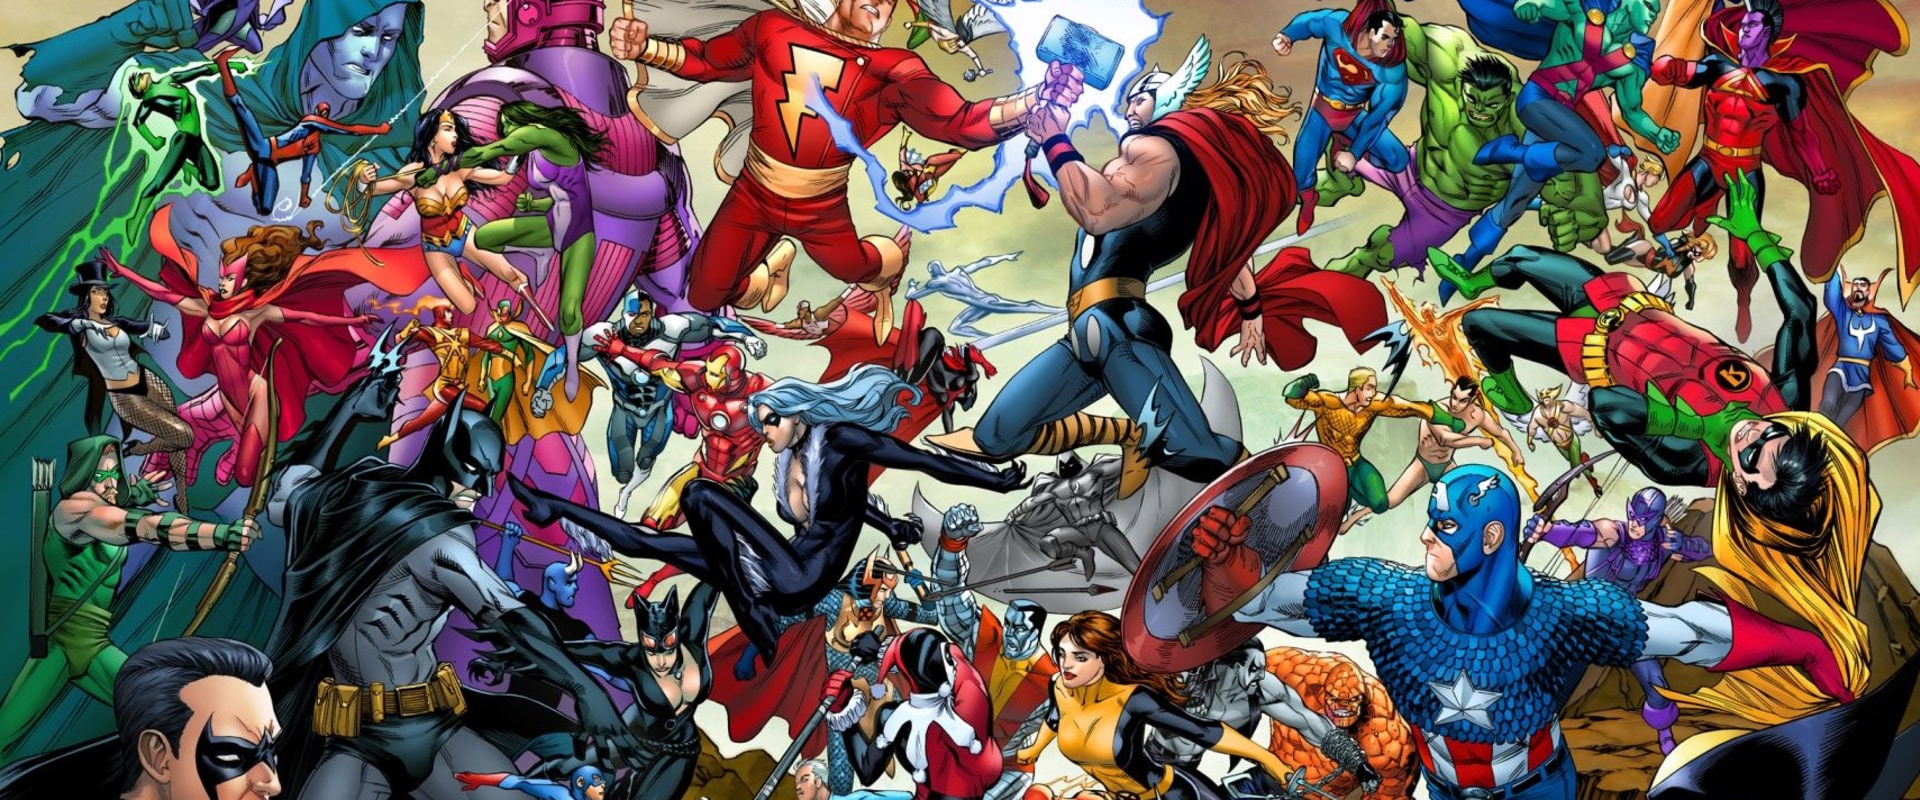 Marvel vs DC: Who Takes the Victory in the Battle of Superheroes?